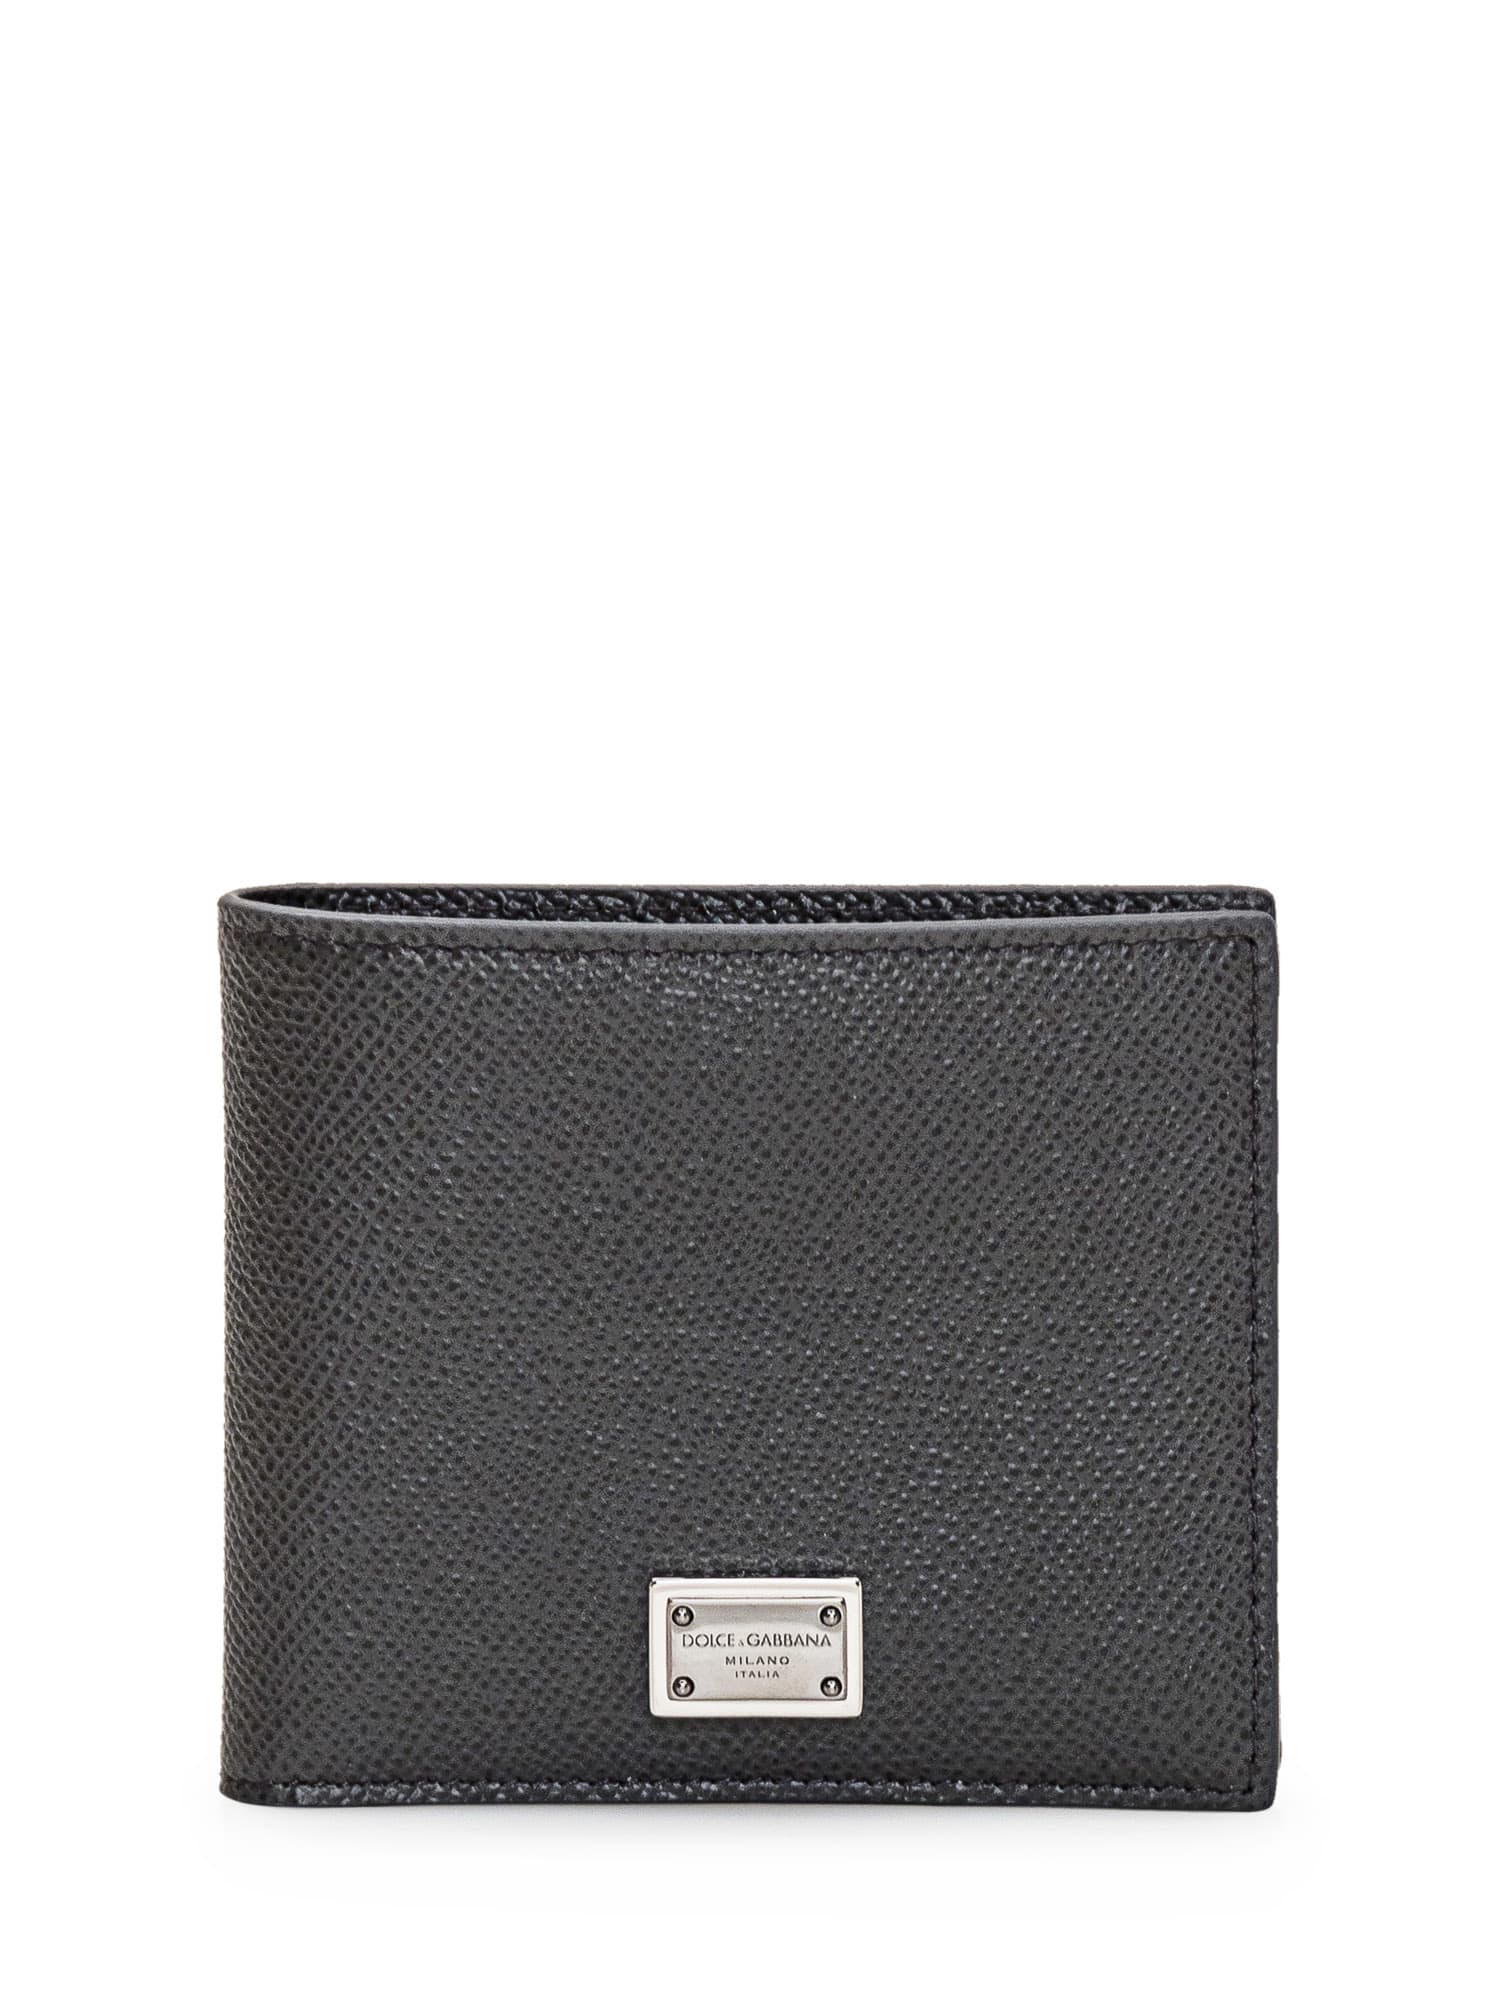 DOLCE & GABBANA BIFOLD WALLET WITH TAG